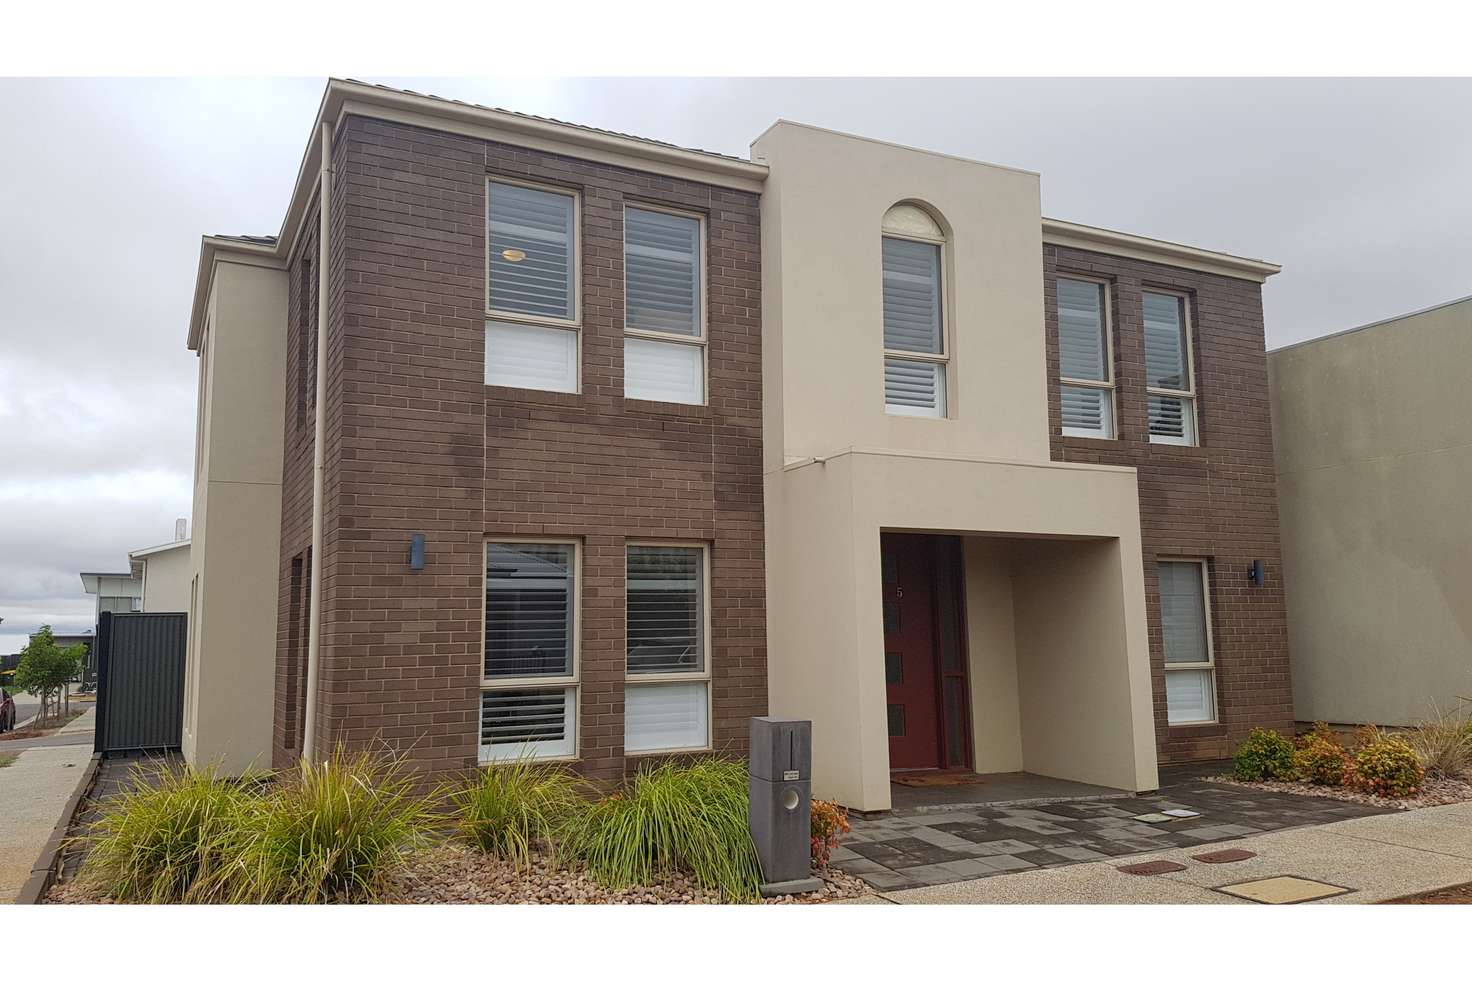 Main view of Homely house listing, 5 ADAMSON STREET, Blakeview SA 5114